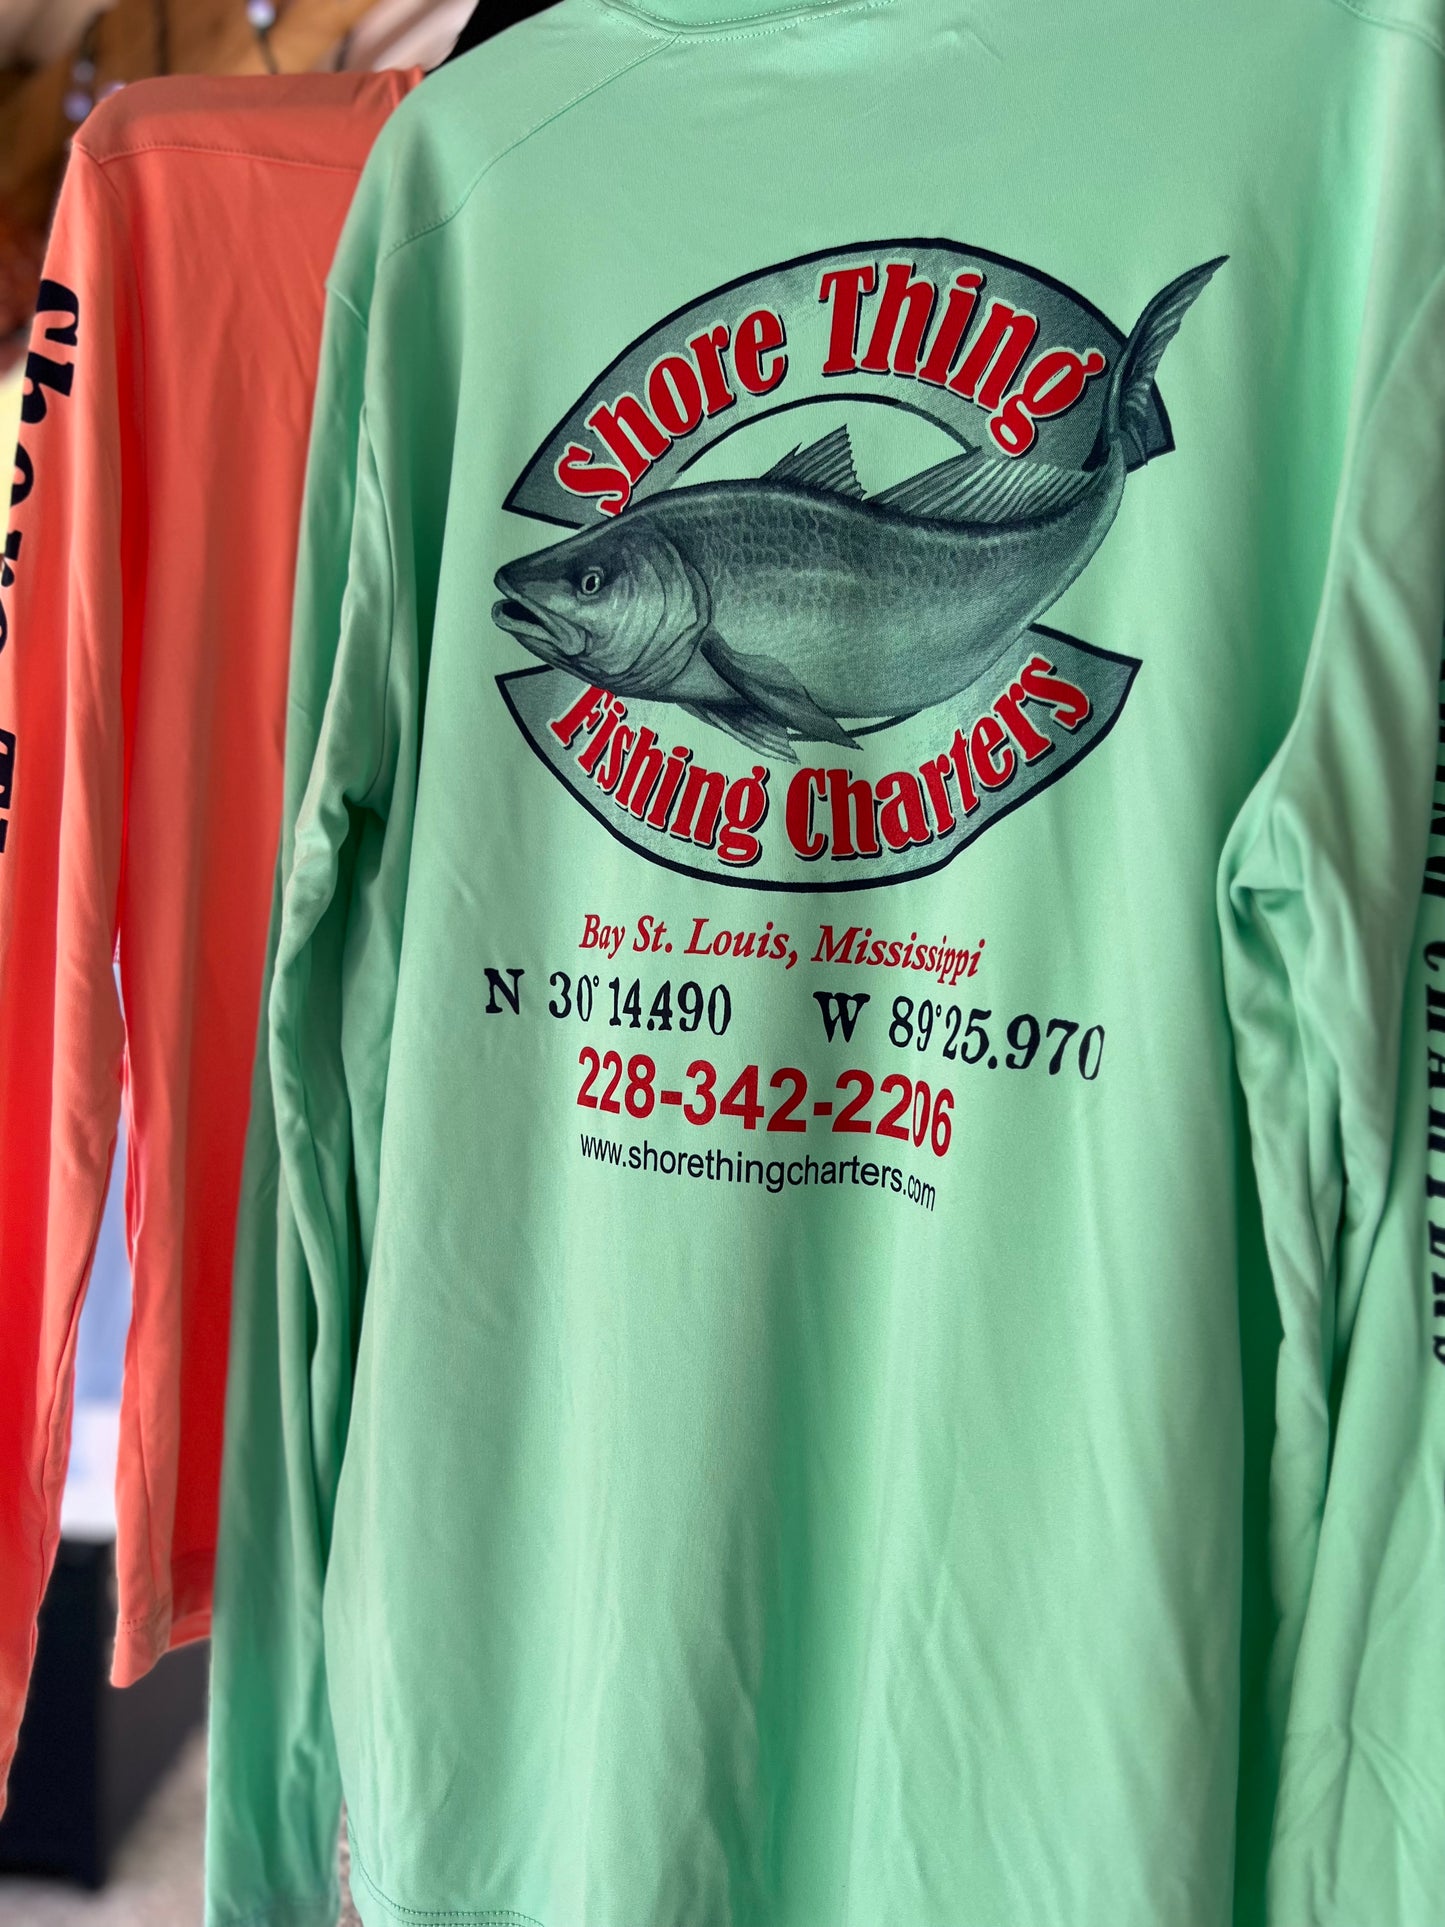 STC Mint Green UPC 50 Long Sleeve Dry Fit